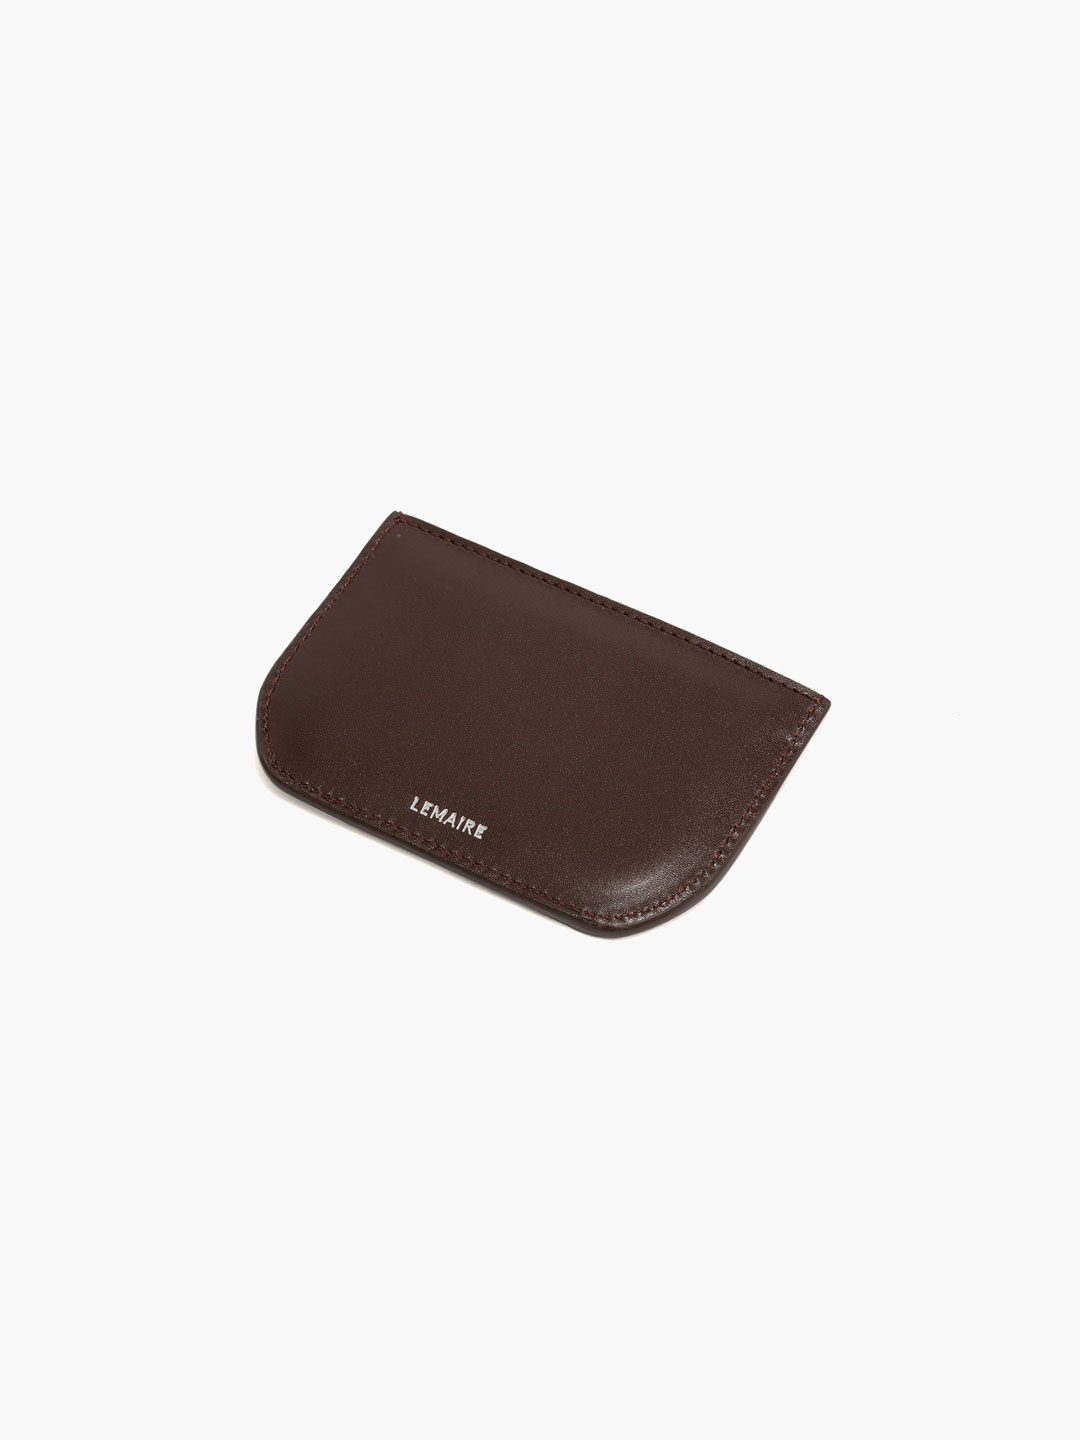 Calepin Card Holder - Brown